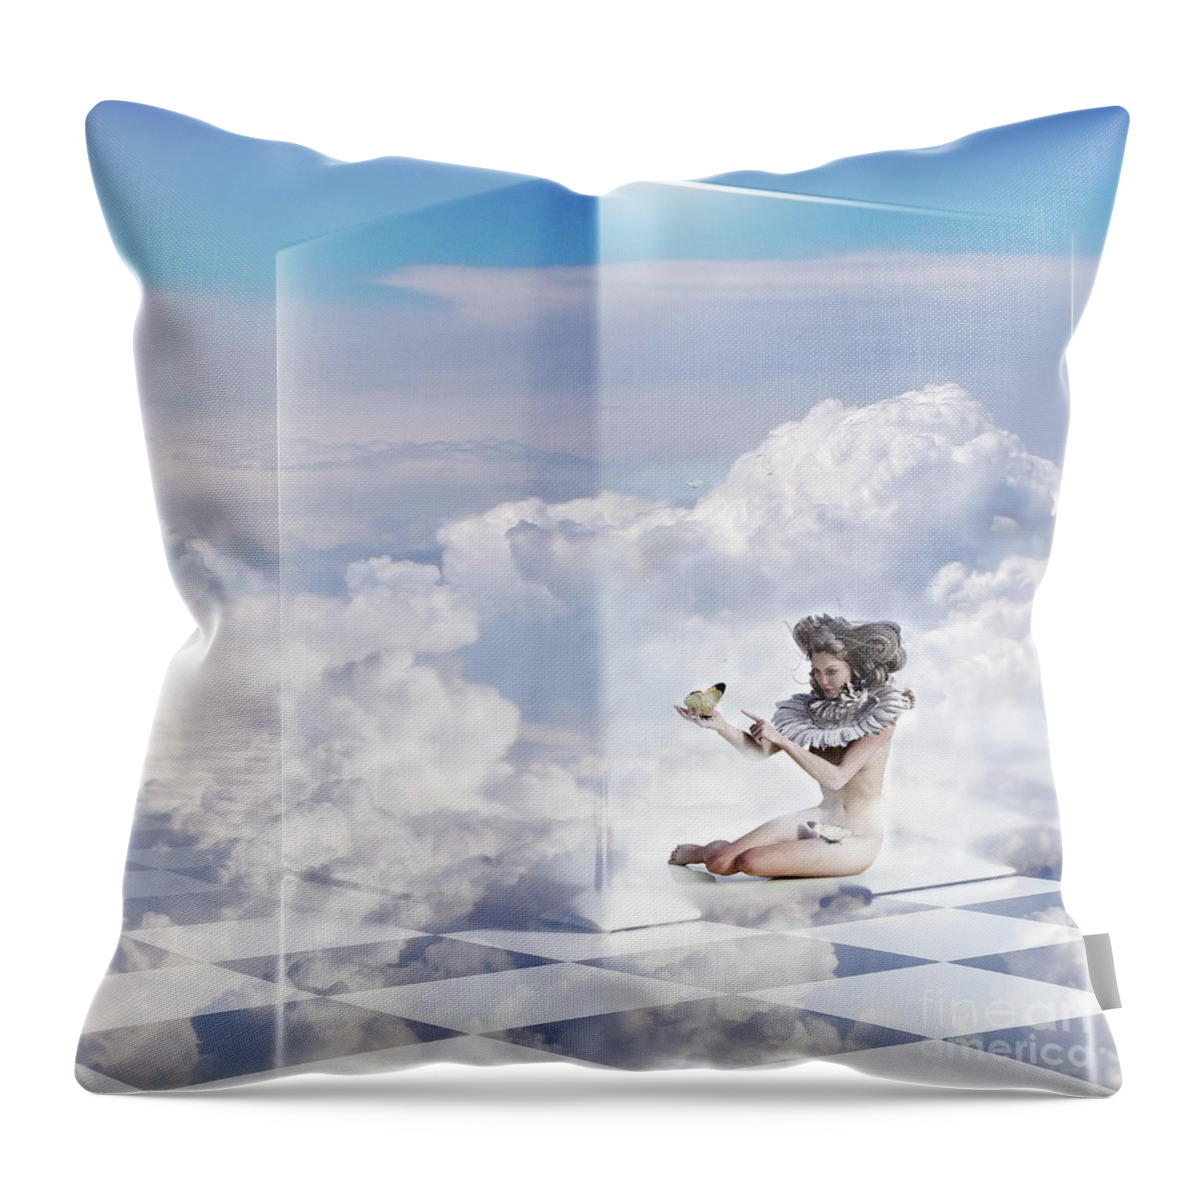 Surrealism Throw Pillow featuring the digital art The little things Part two by Jacky Gerritsen